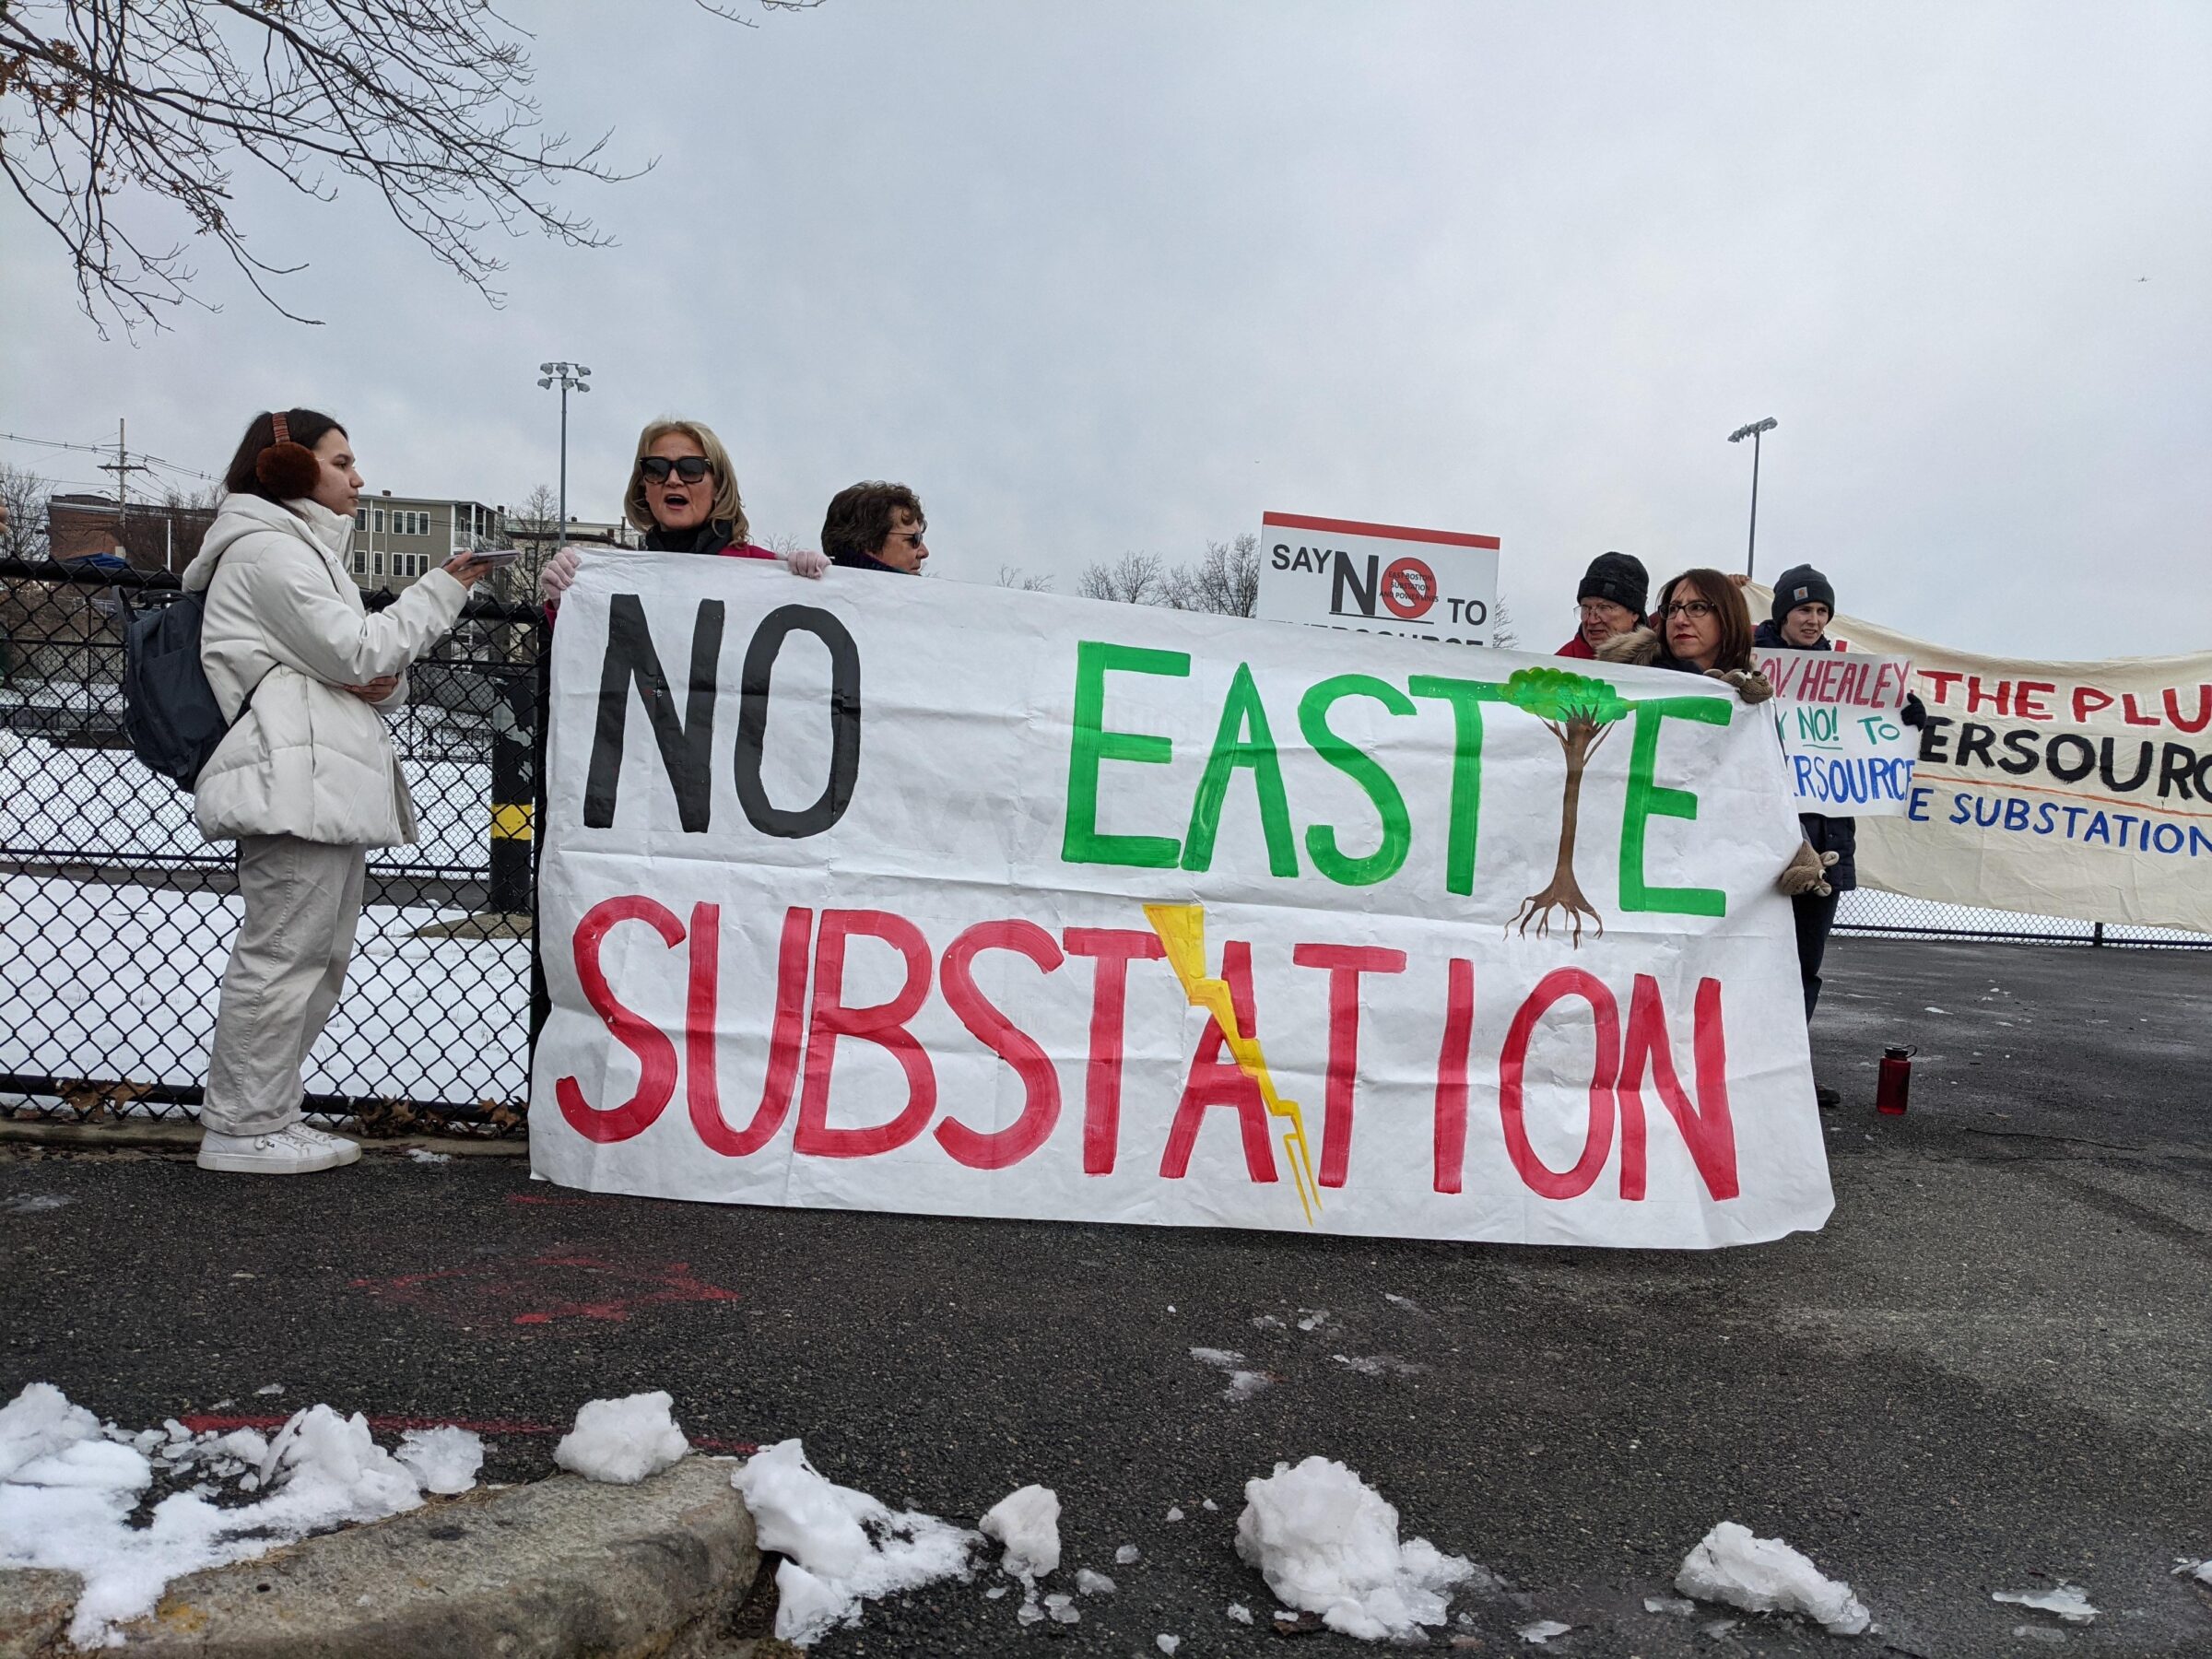 An exterior shot of protesters holding up a banner that reads, "No Eastie Substation."